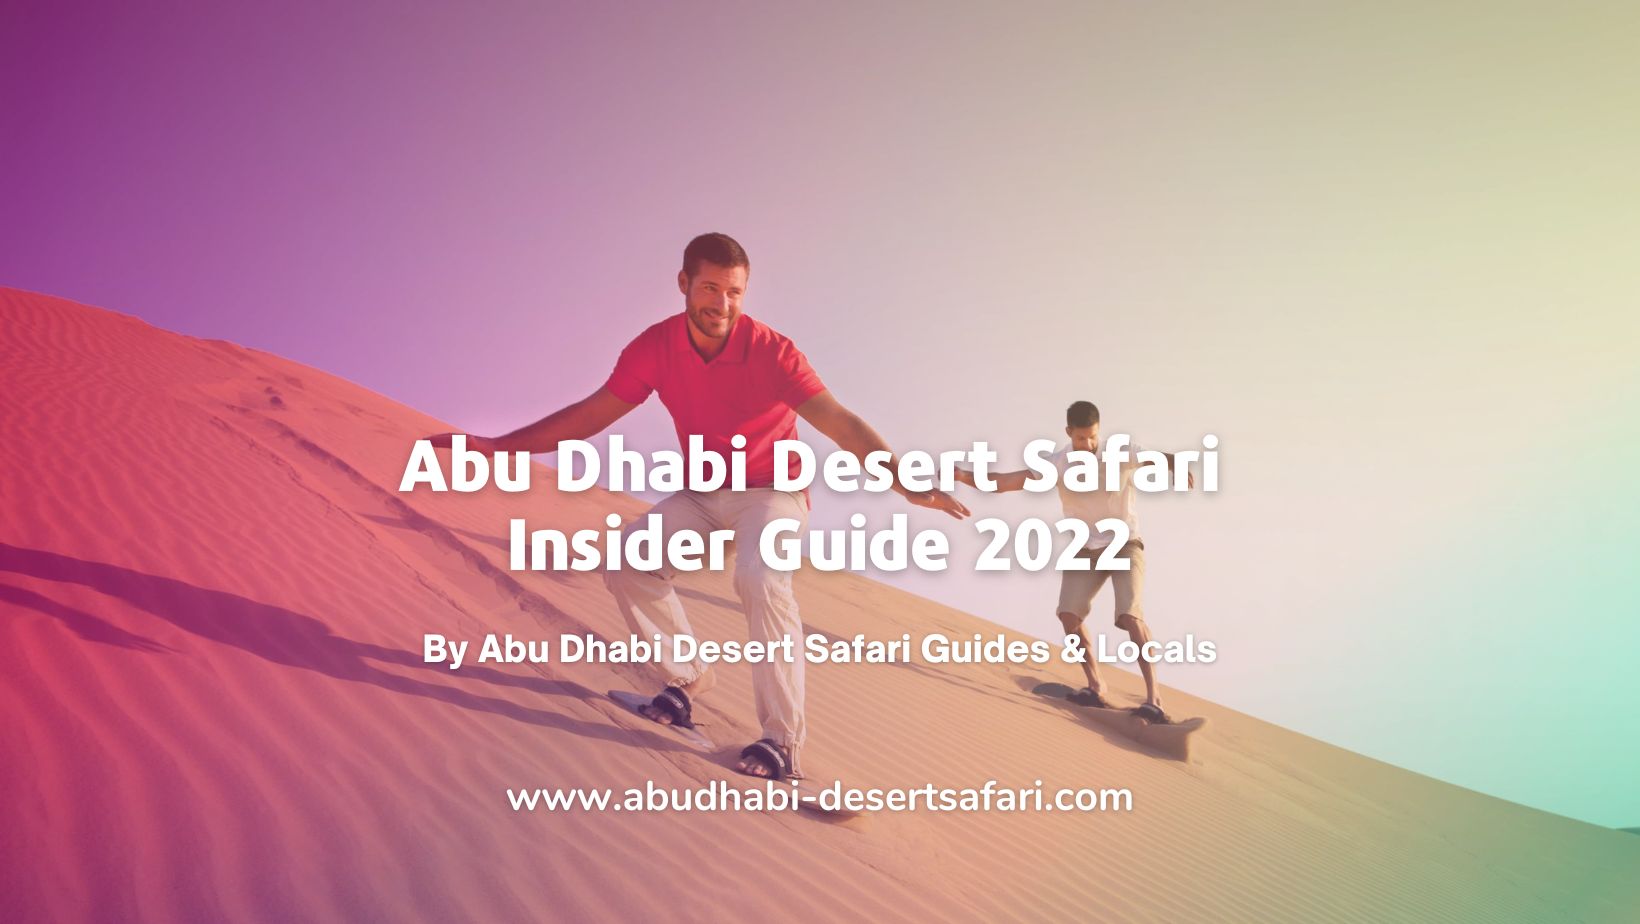 What you need to know about Abu Dhabi Desert Safari Insider Guide 2022